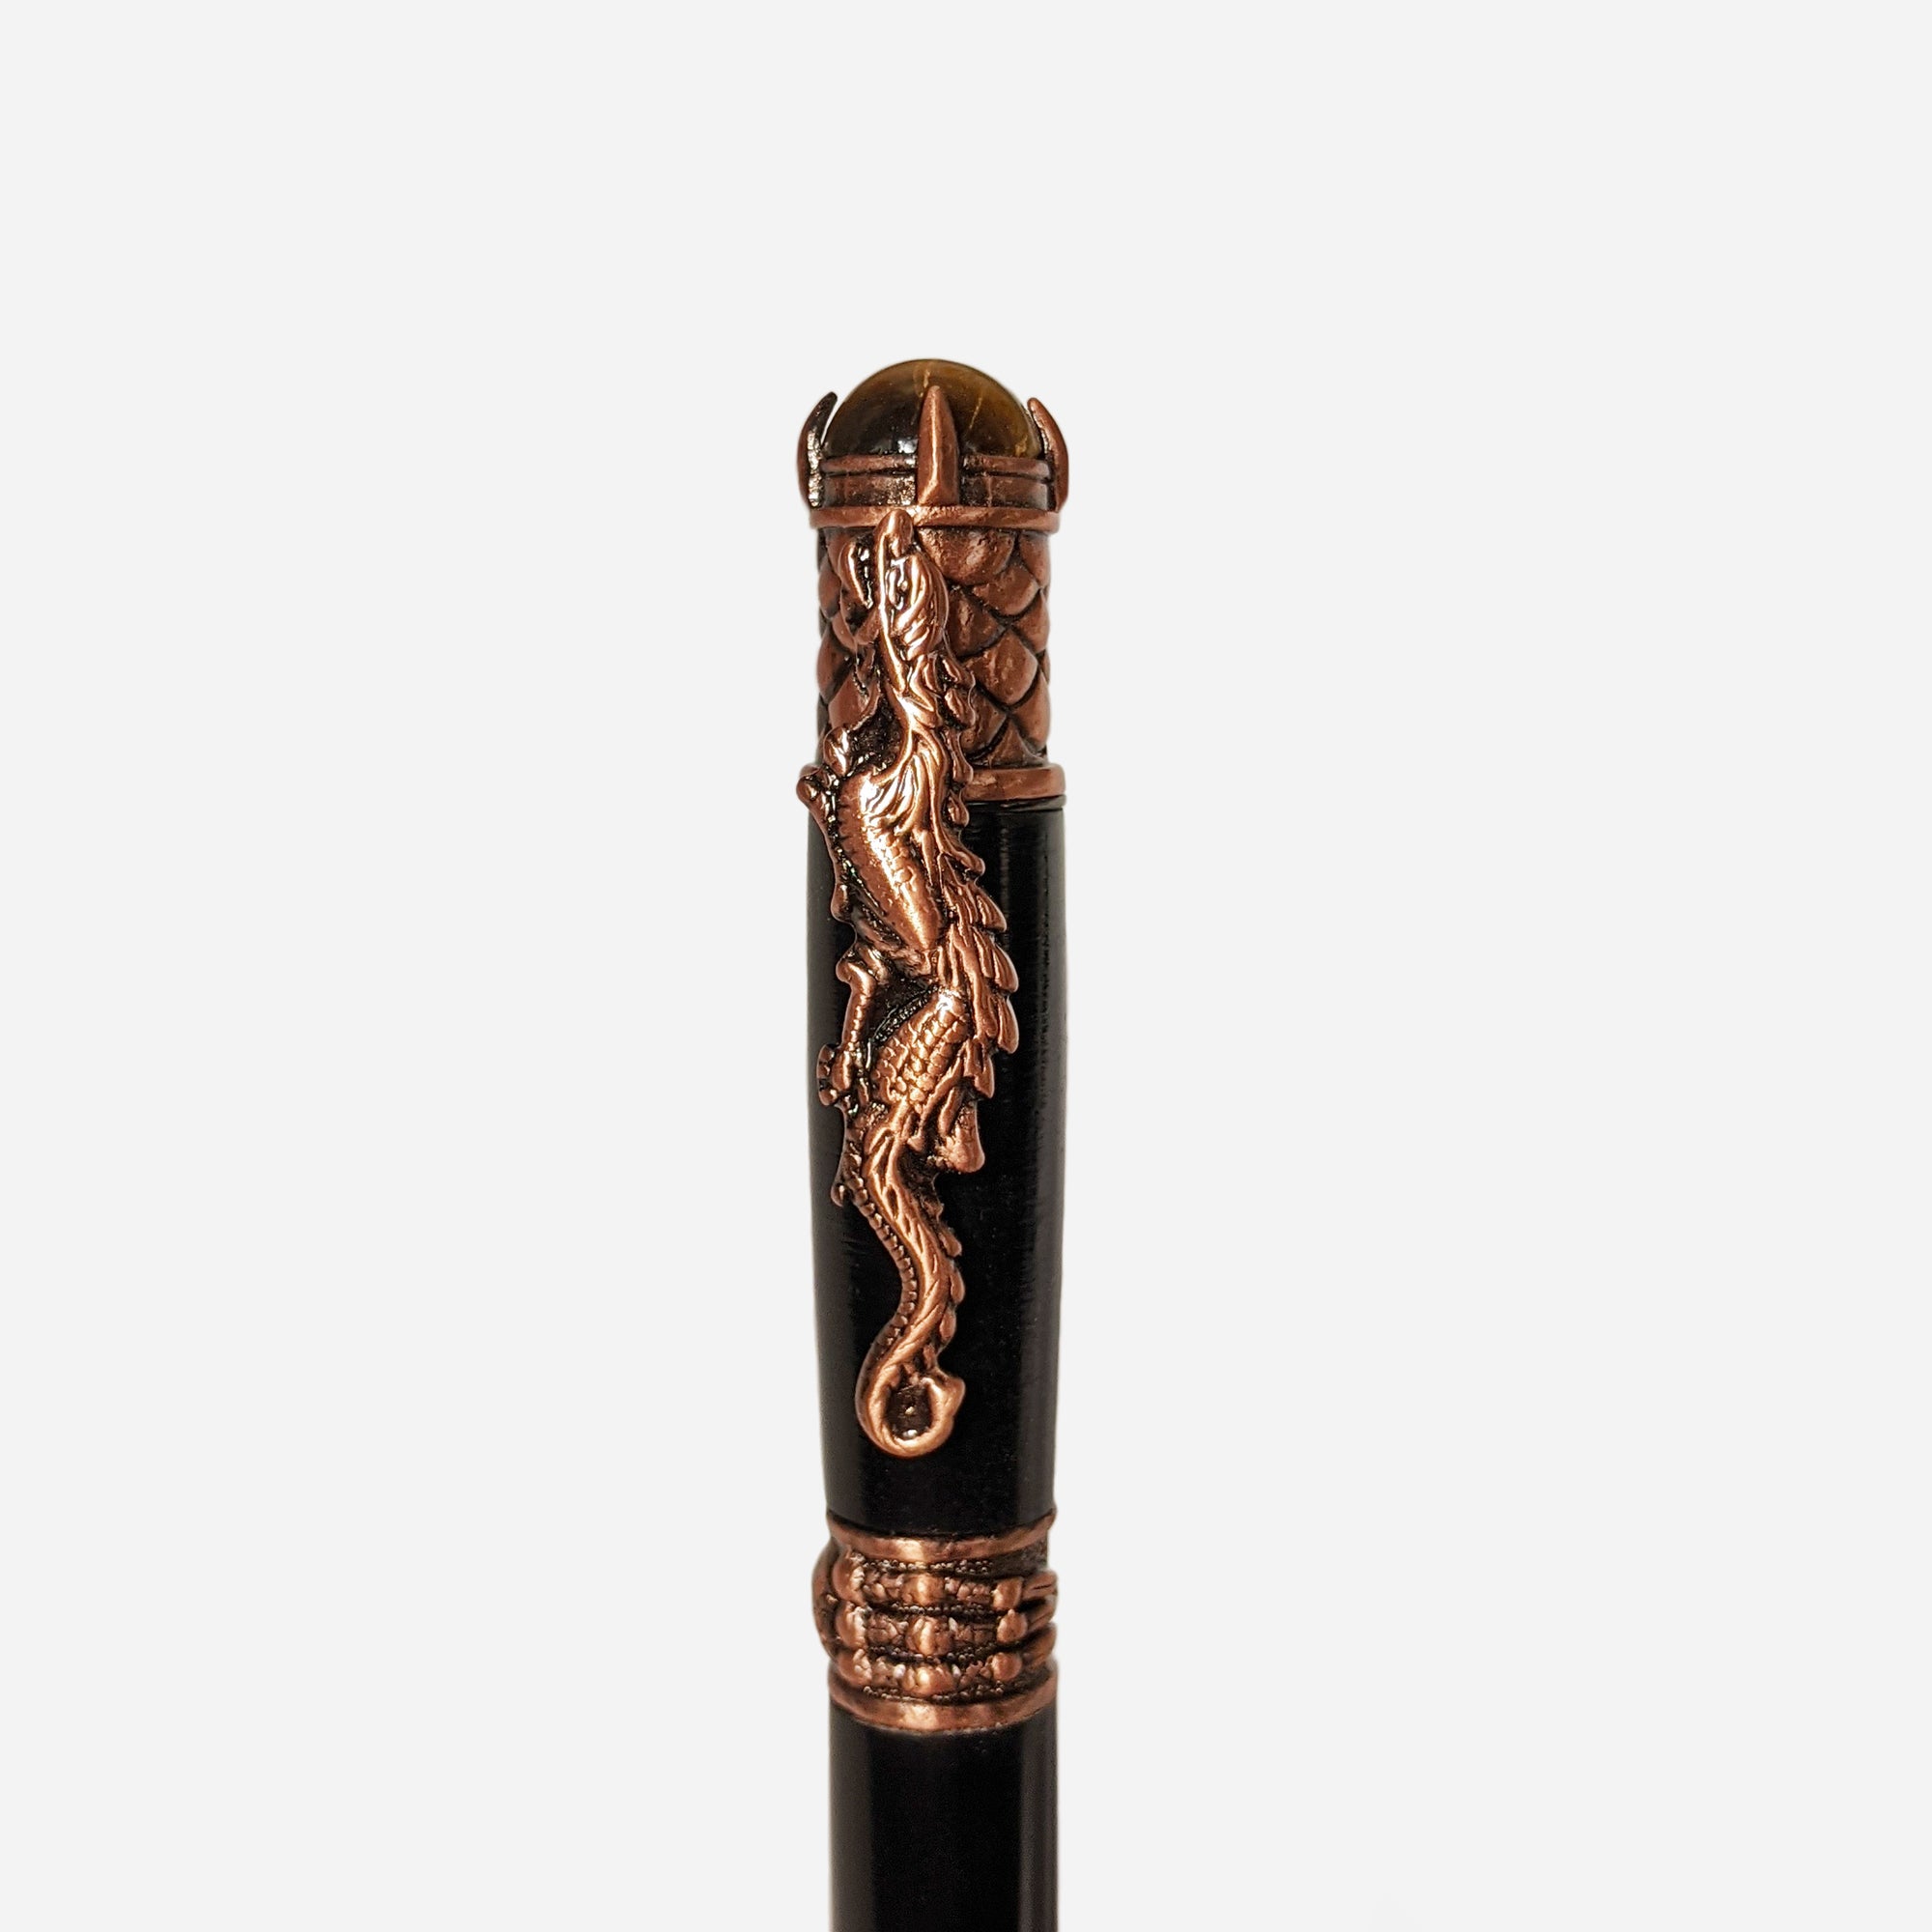 Dragon Twist Pen (by Cris Wolf, sold out)